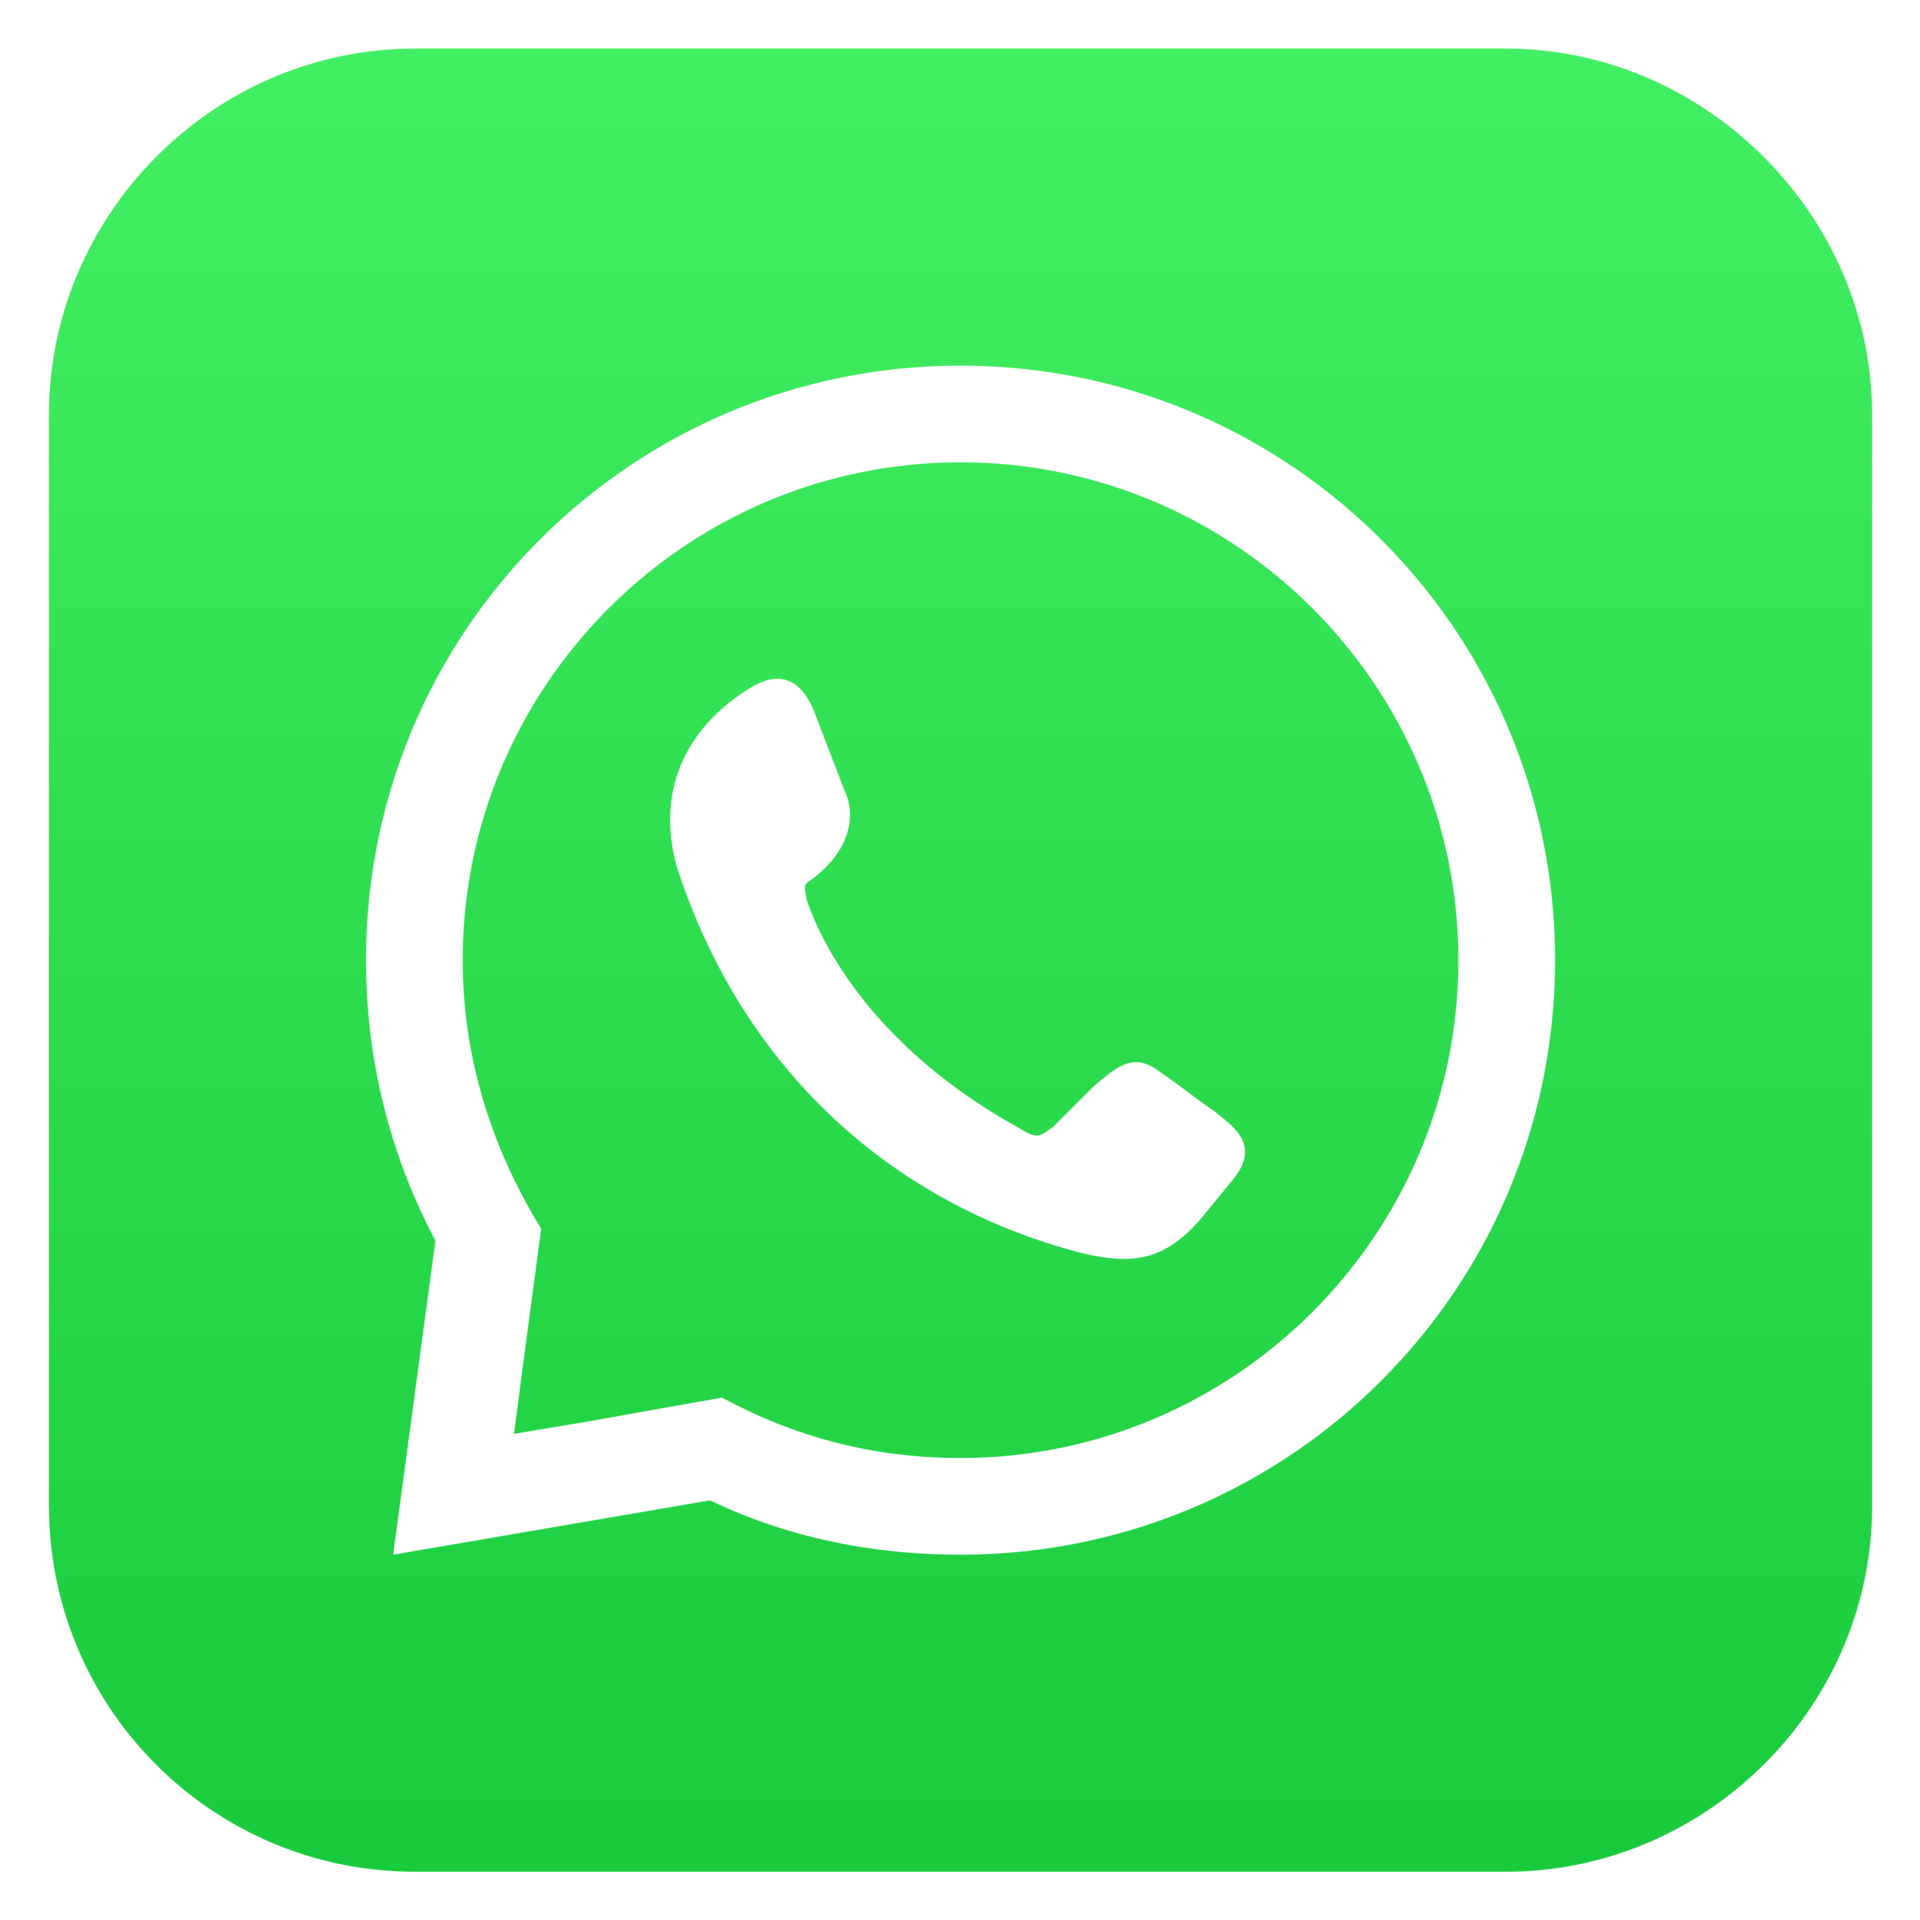 Whatsapp Icon PNGs for Free Download